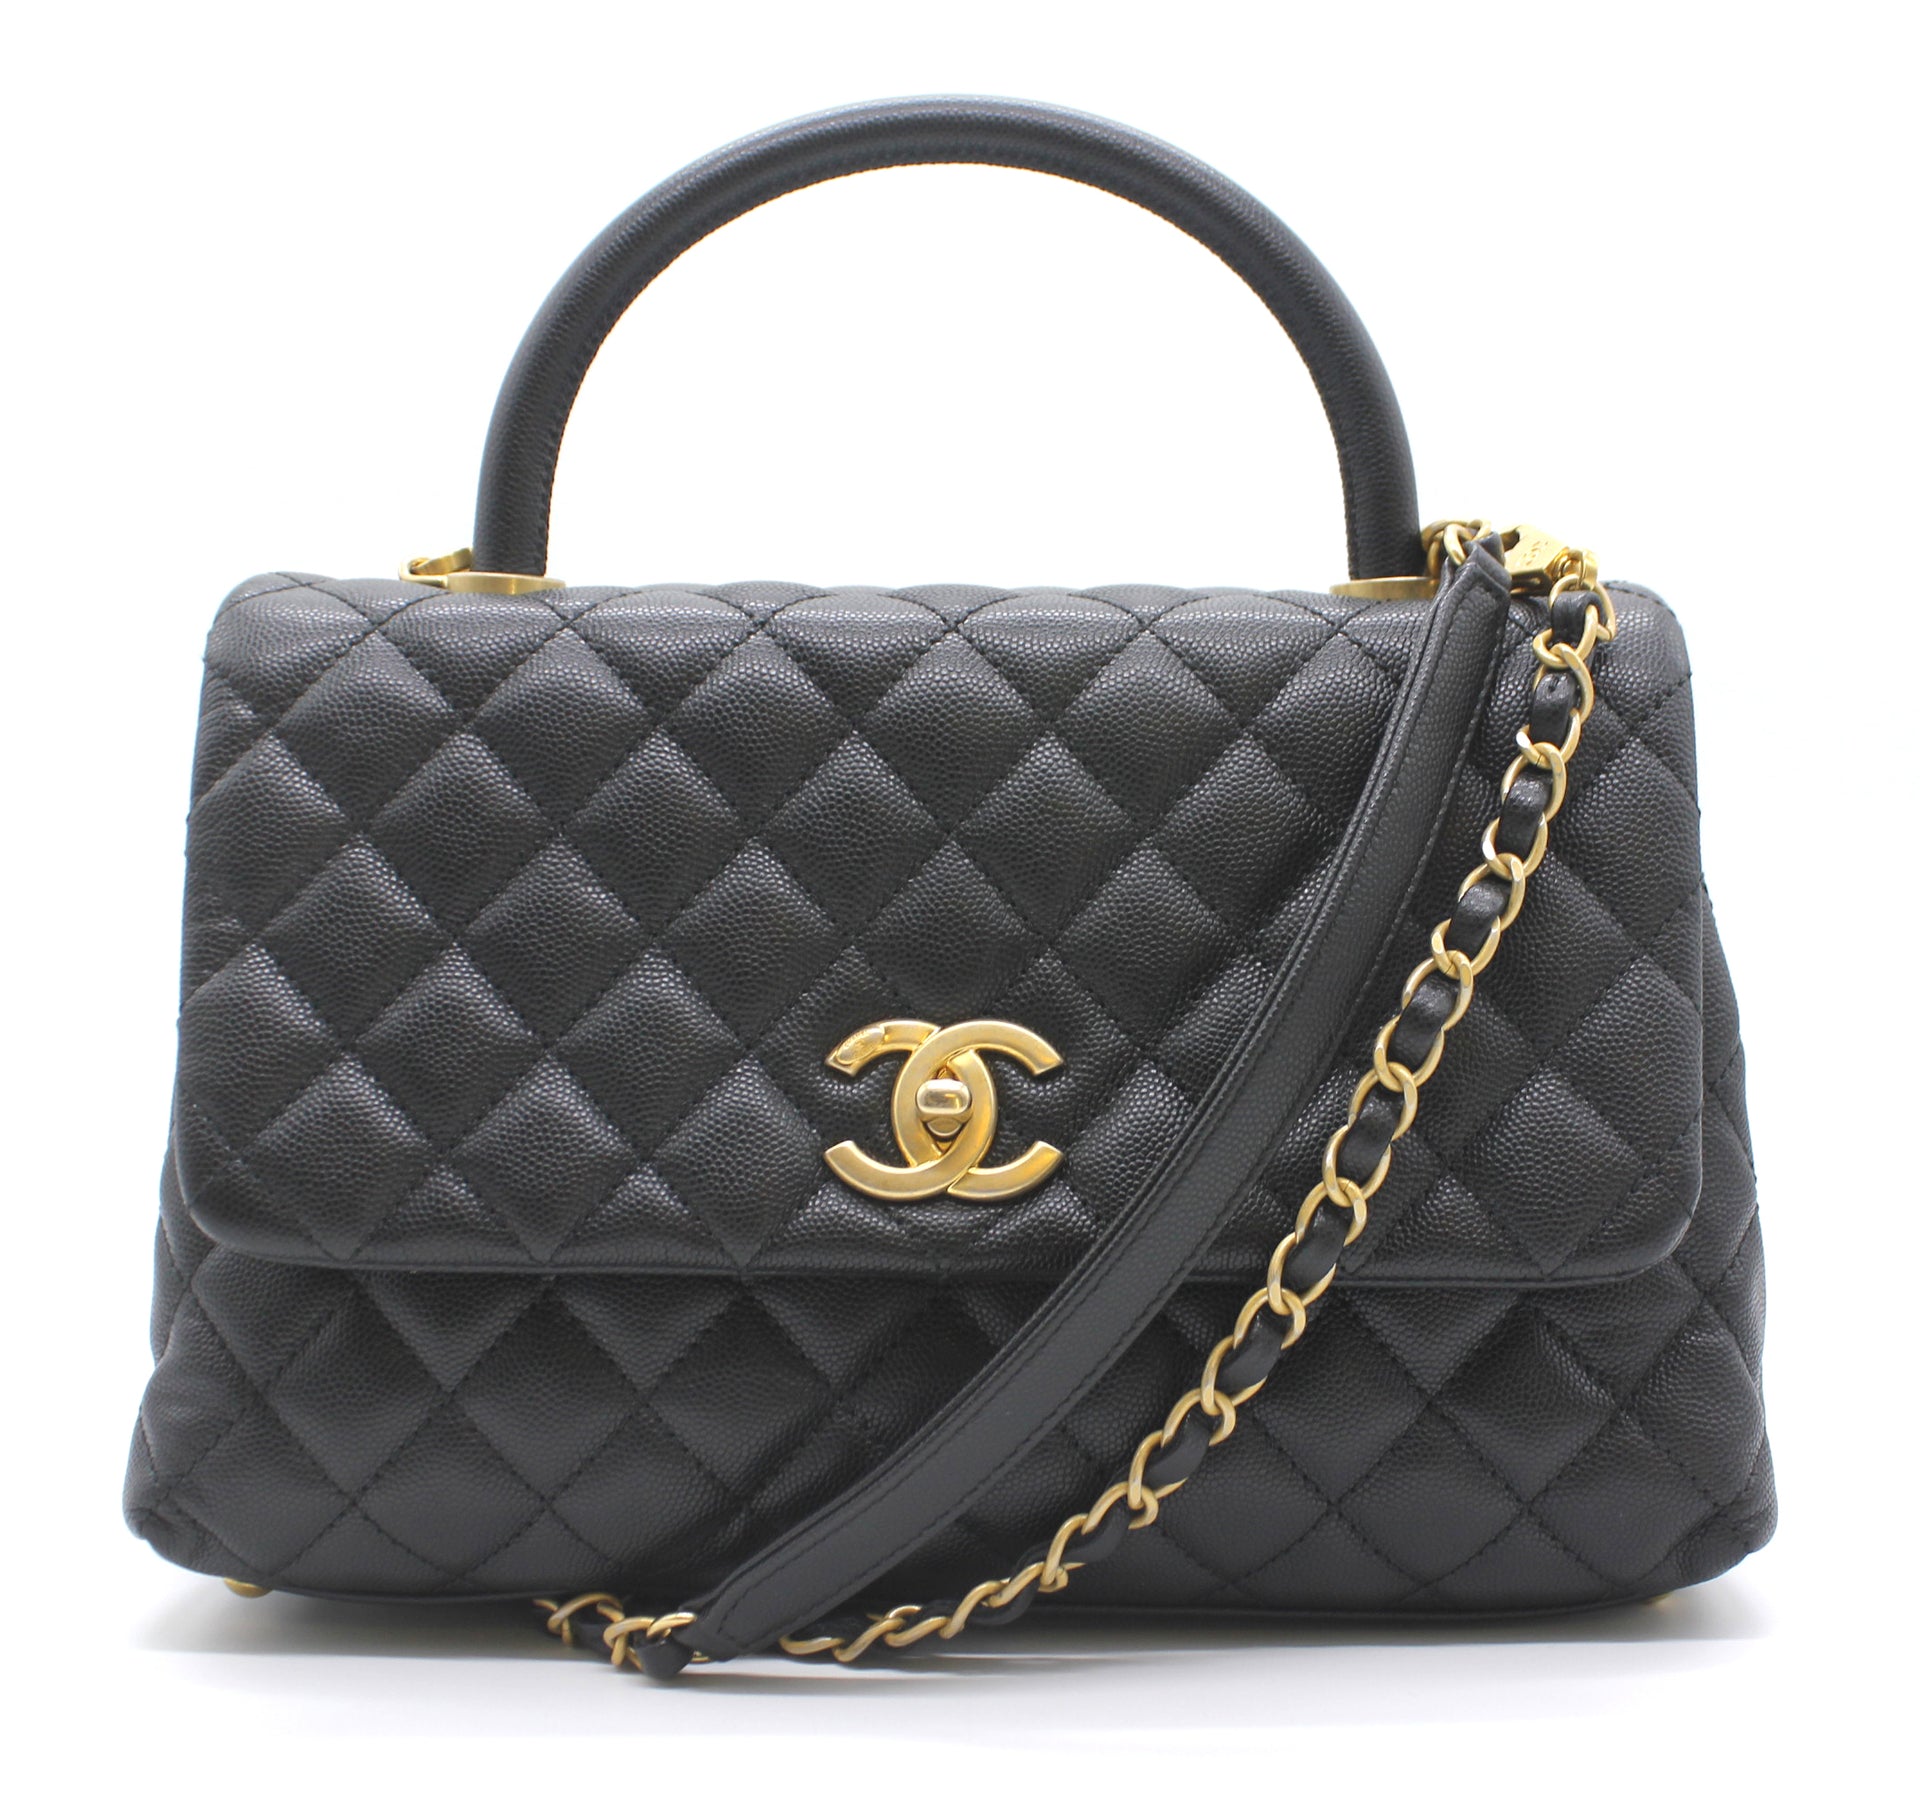 Chanel Deauville Medium Tote in Black Calfskin Vernice with Shiny Silver  Hardware - New - SOLD